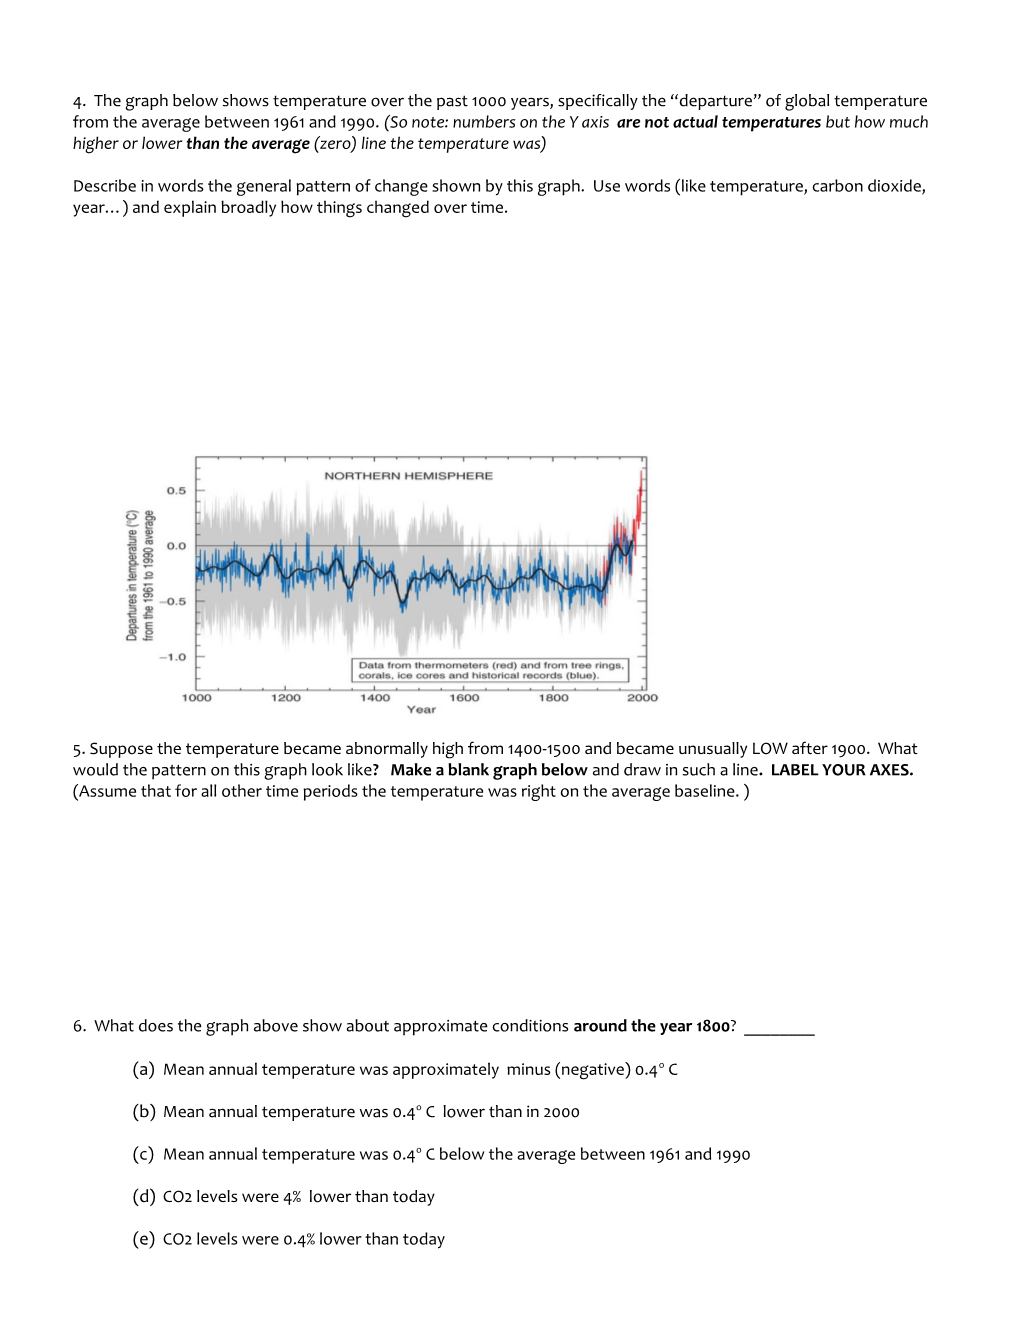 Homework #4. Climate Graphs and Stabilization Name______